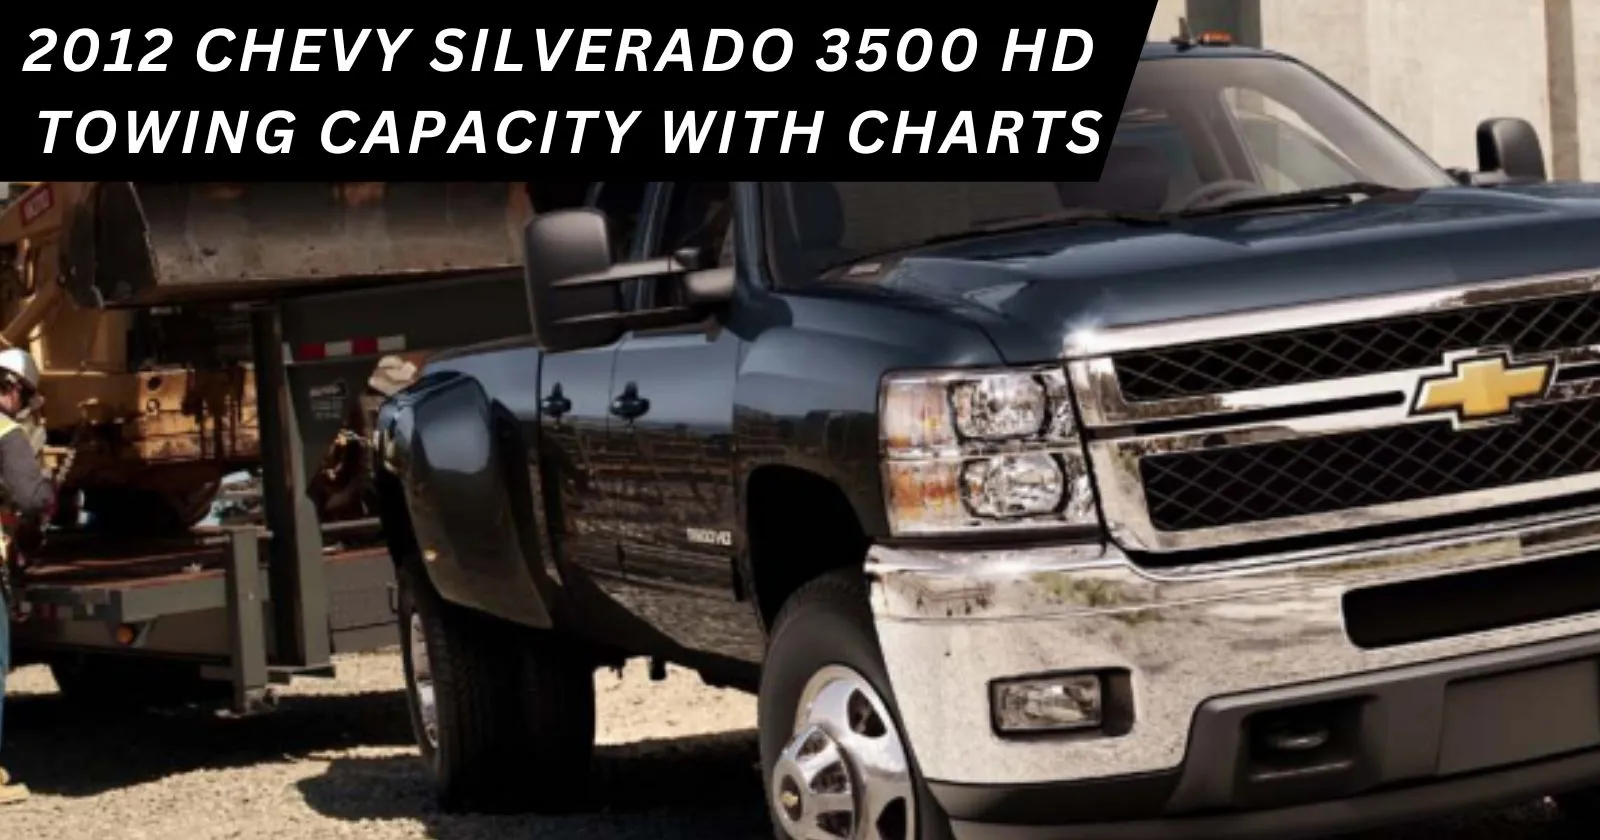 Explore the 2012 Chevy Silverado 3500 HD Towing Capacity with charts